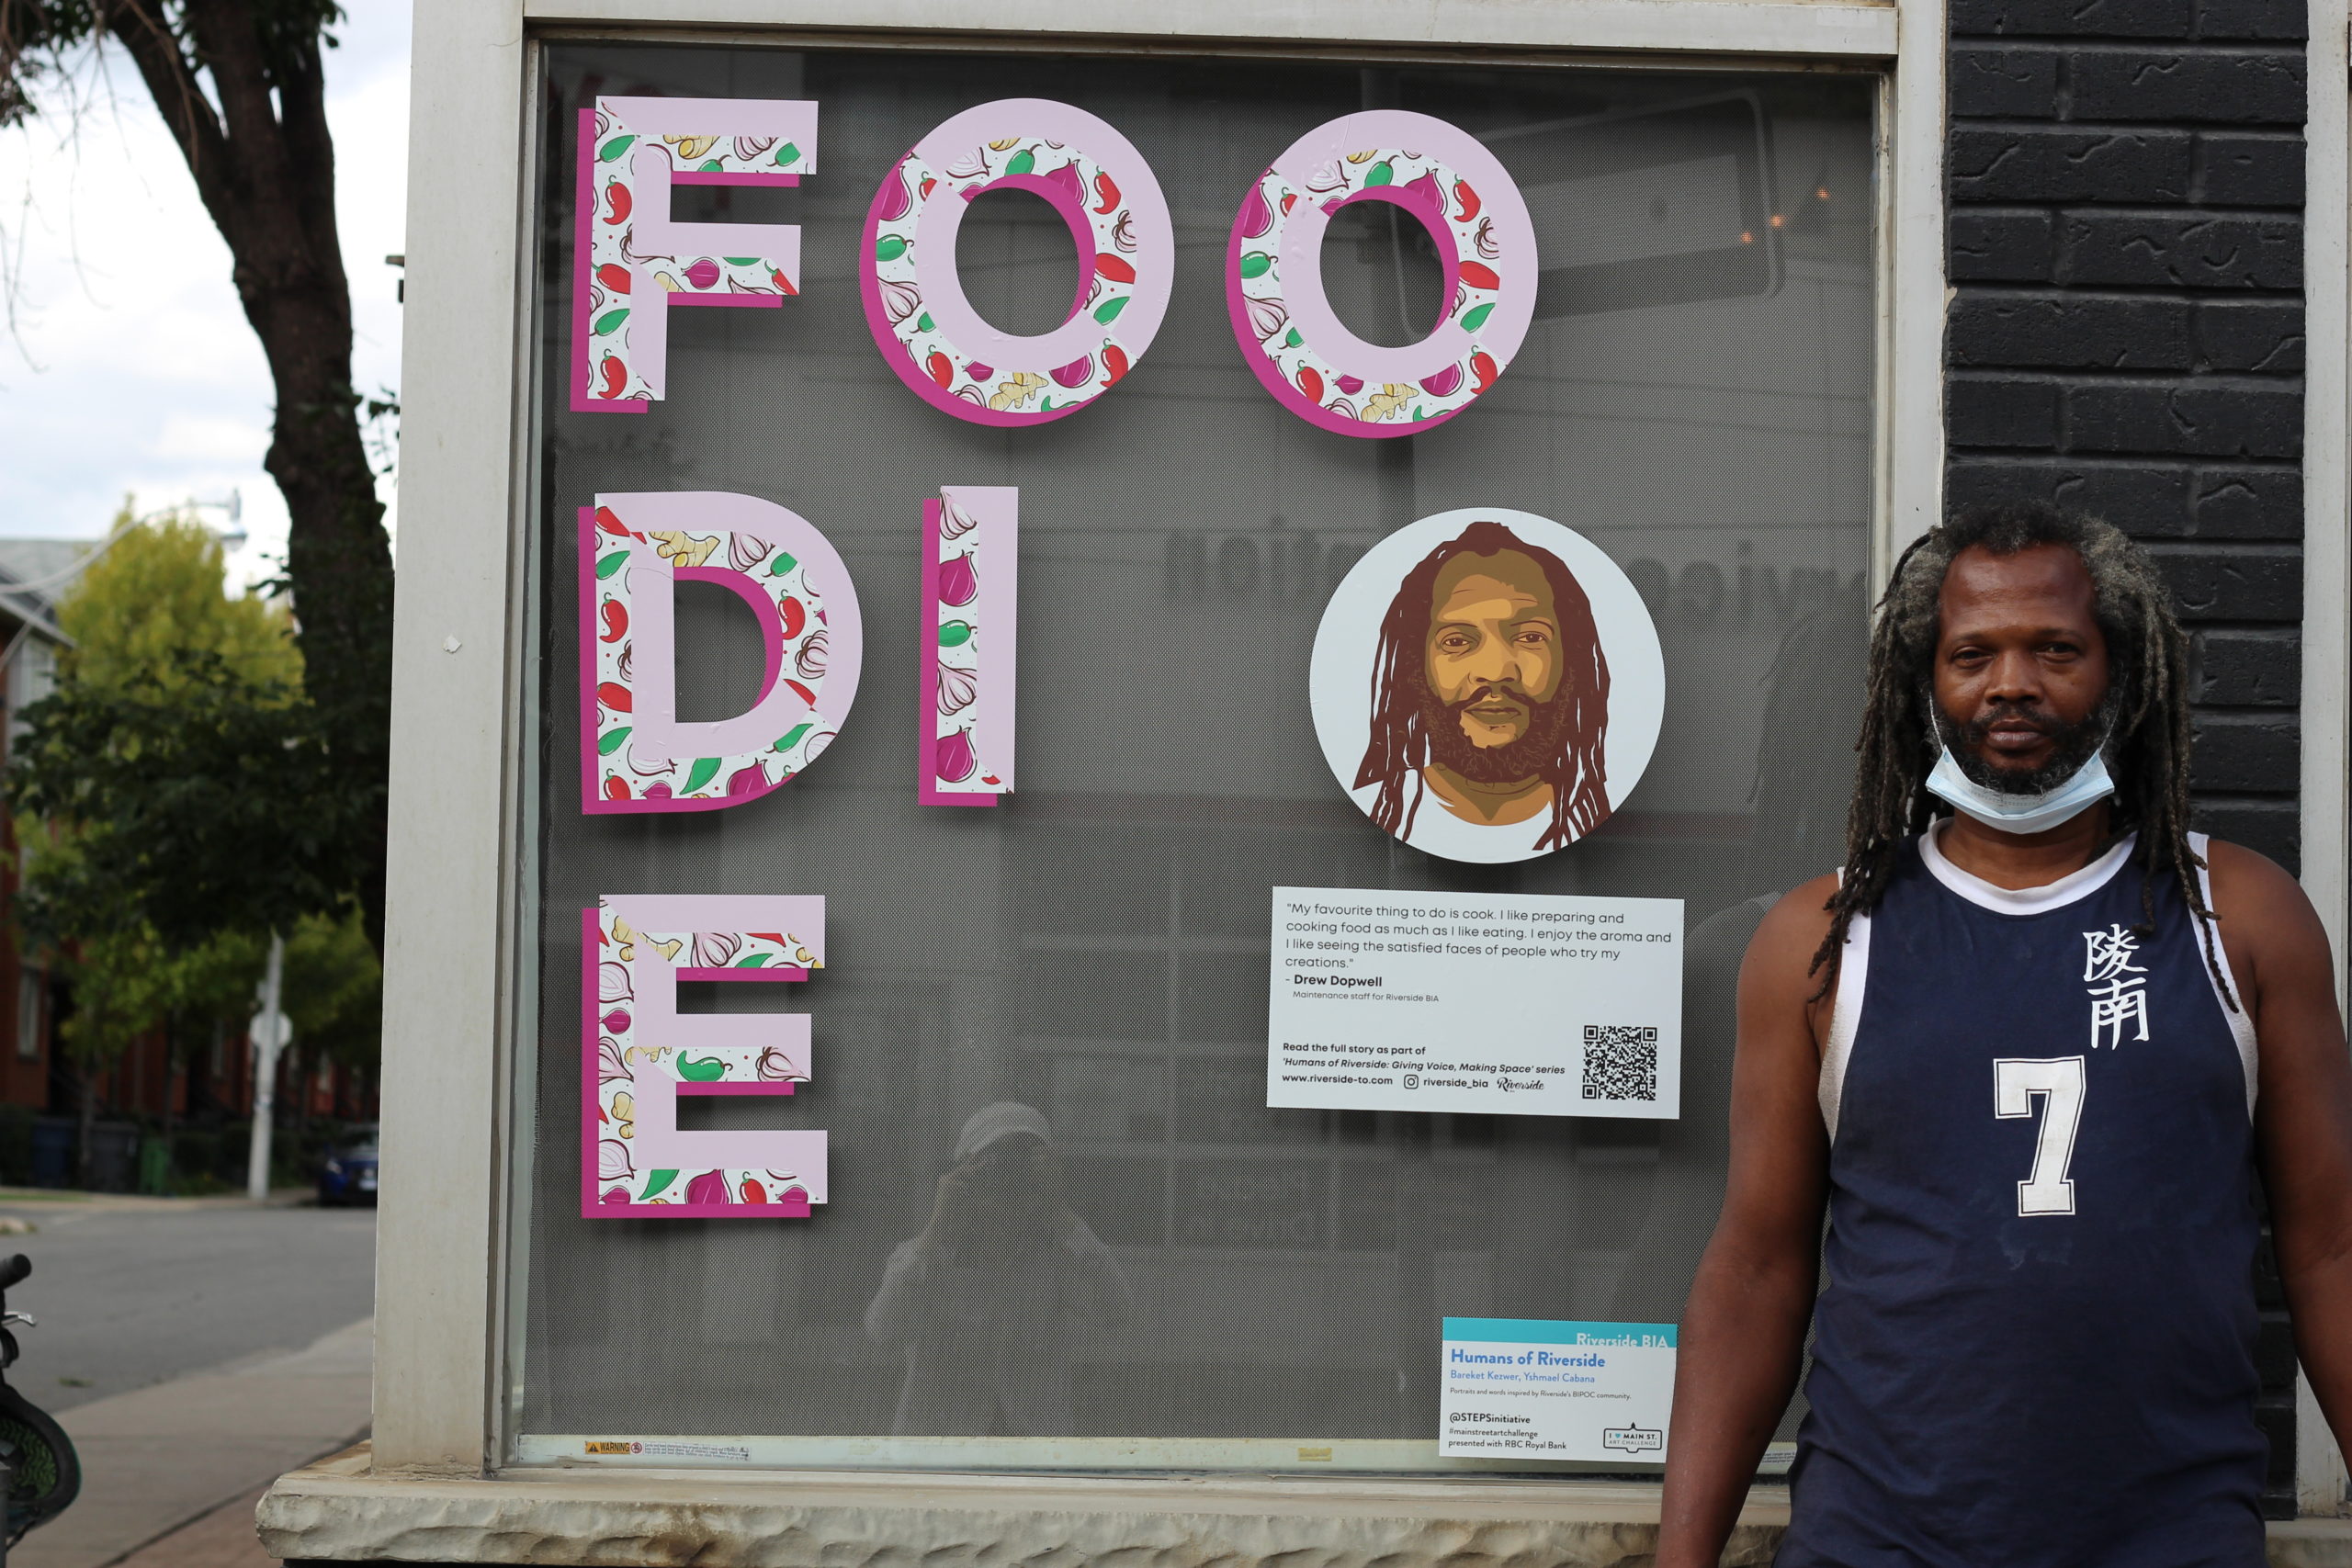 A person standing next to a window decal with an illustrated type and portrait that says Foodie.